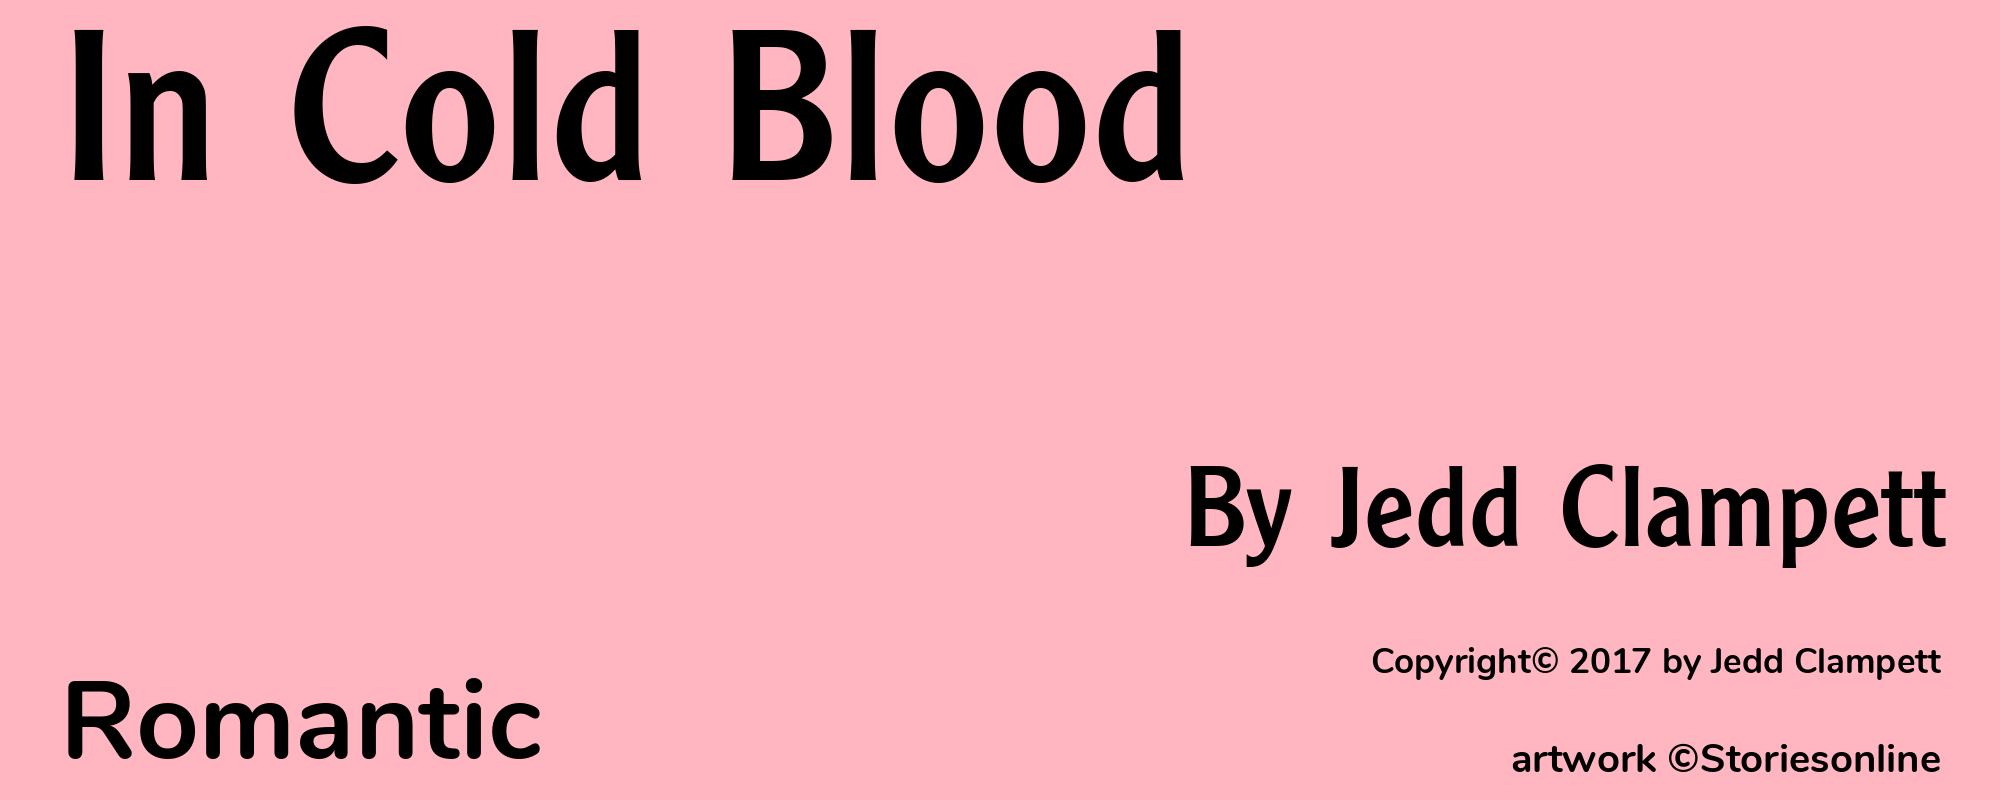 In Cold Blood - Cover